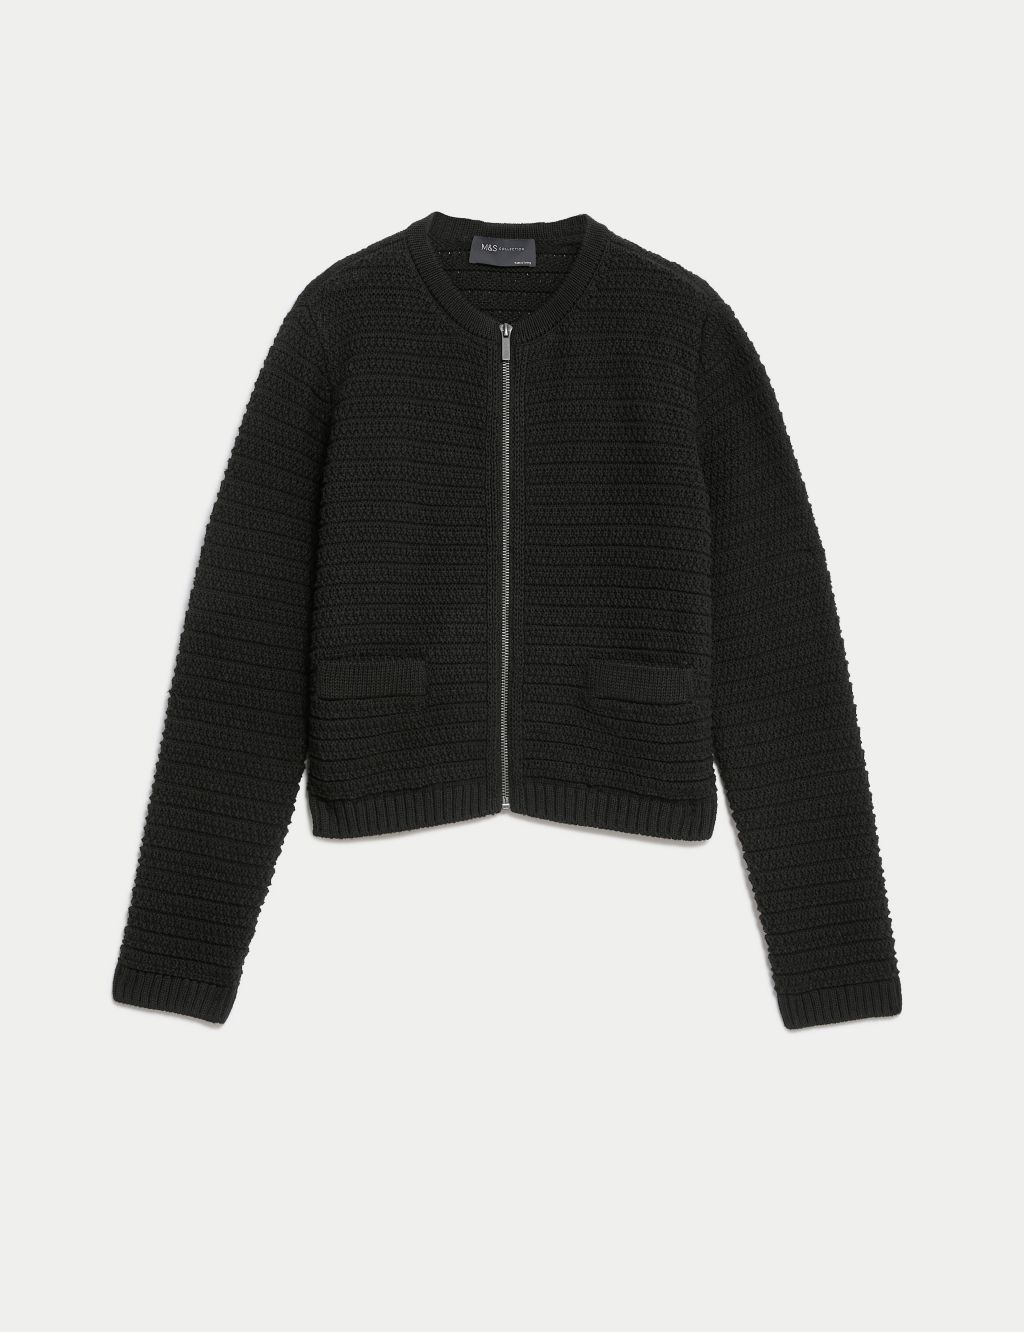 Cotton Rich Textured Knitted Jacket | M&S Collection | M&S